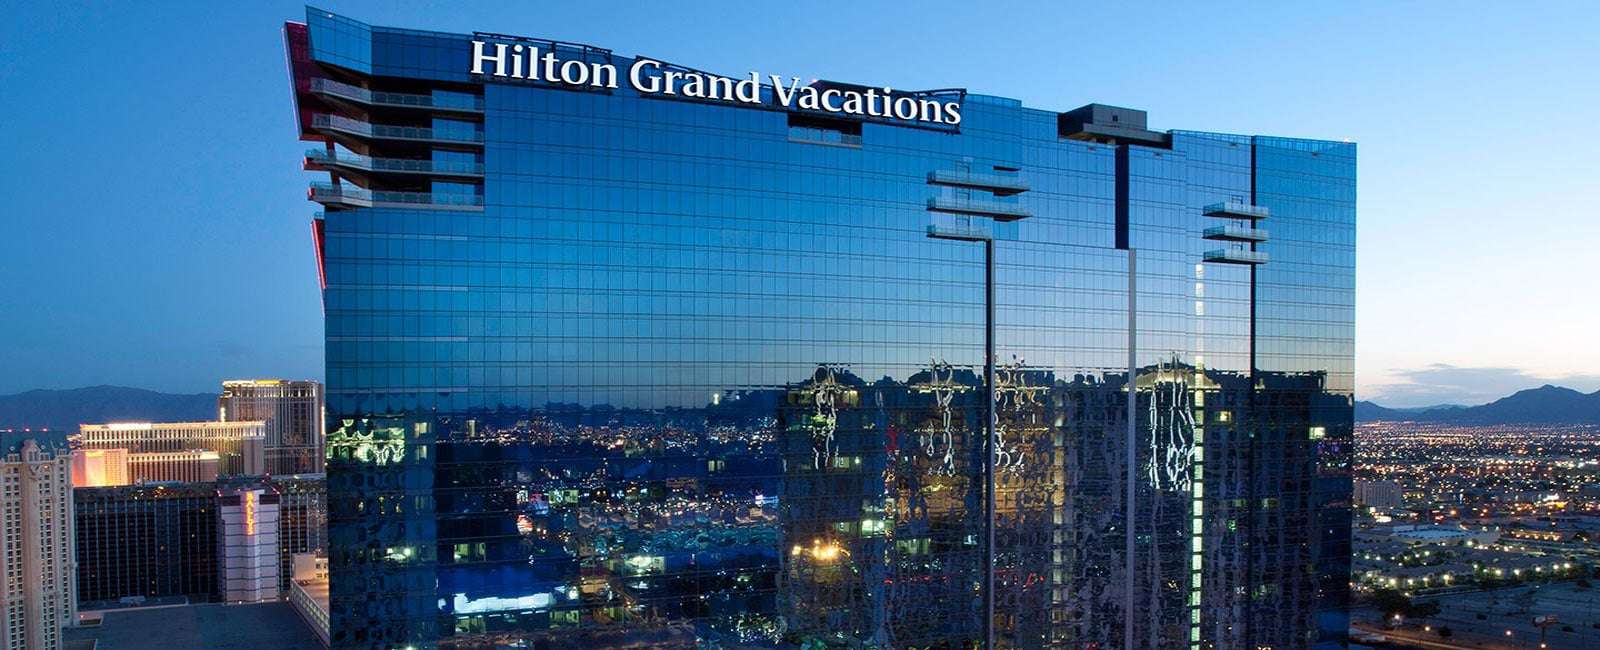 Hilton Grand Vacations Timeshare Presentation Review ...